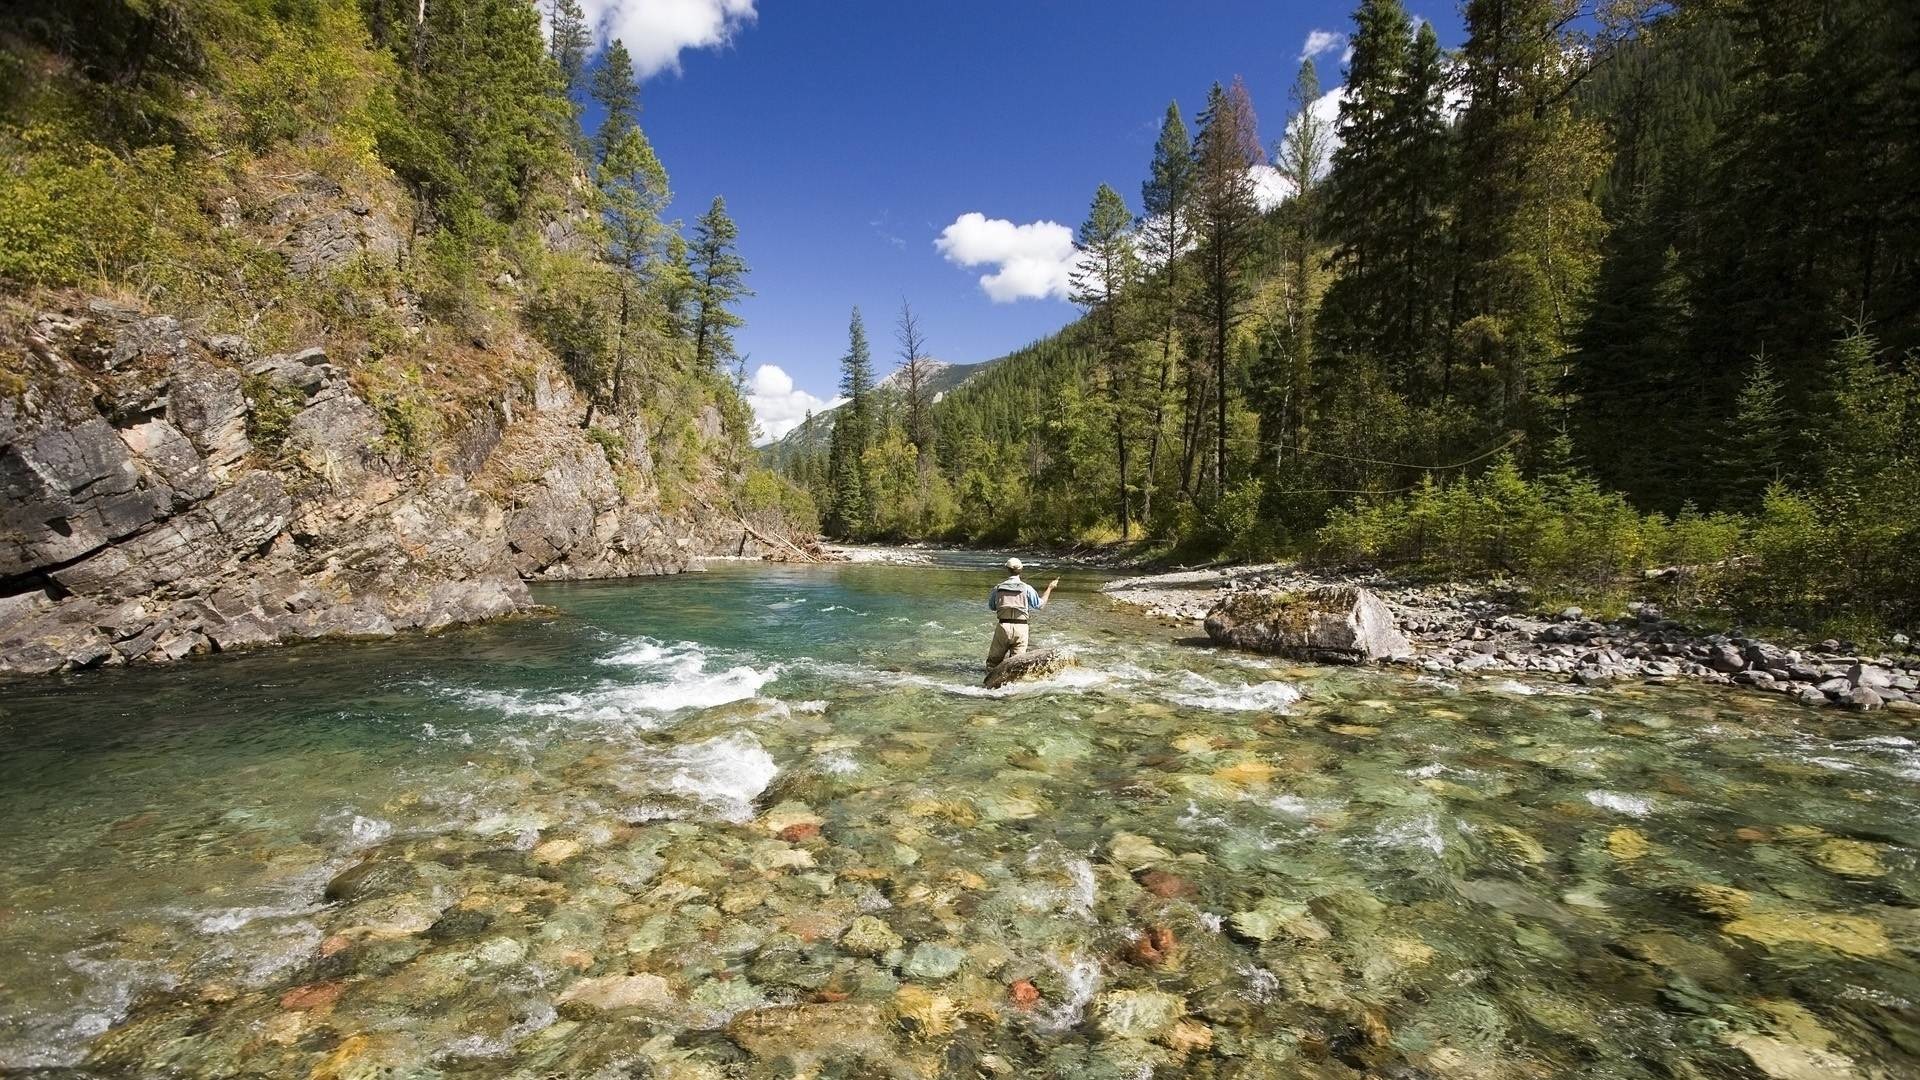 Fly Fishing Wallpaper 45 Images